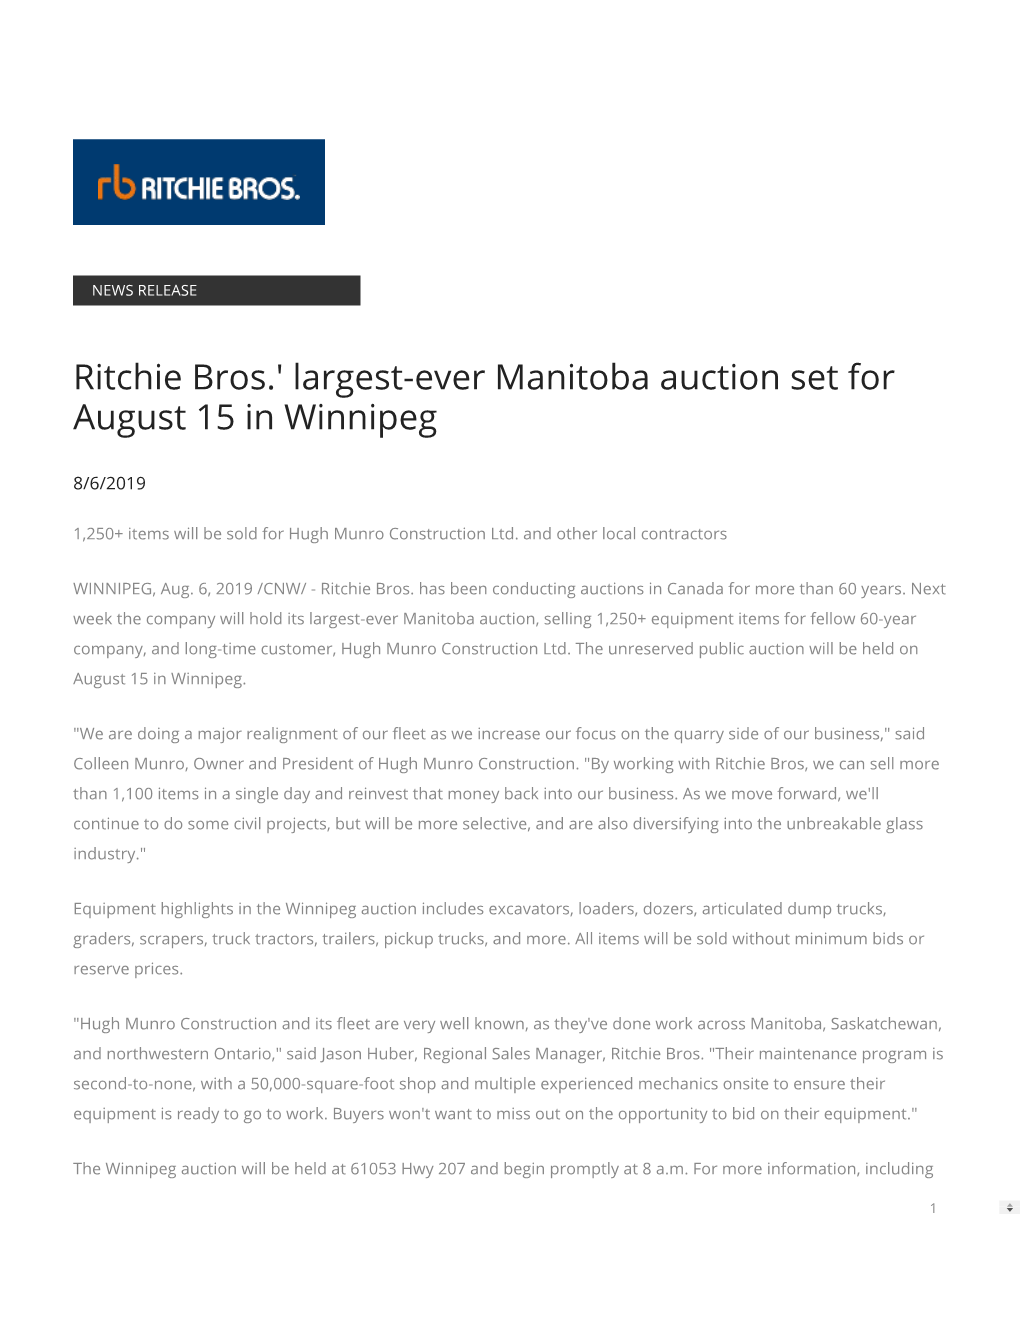 Ritchie Bros.' Largest-Ever Manitoba Auction Set for August 15 in Winnipeg